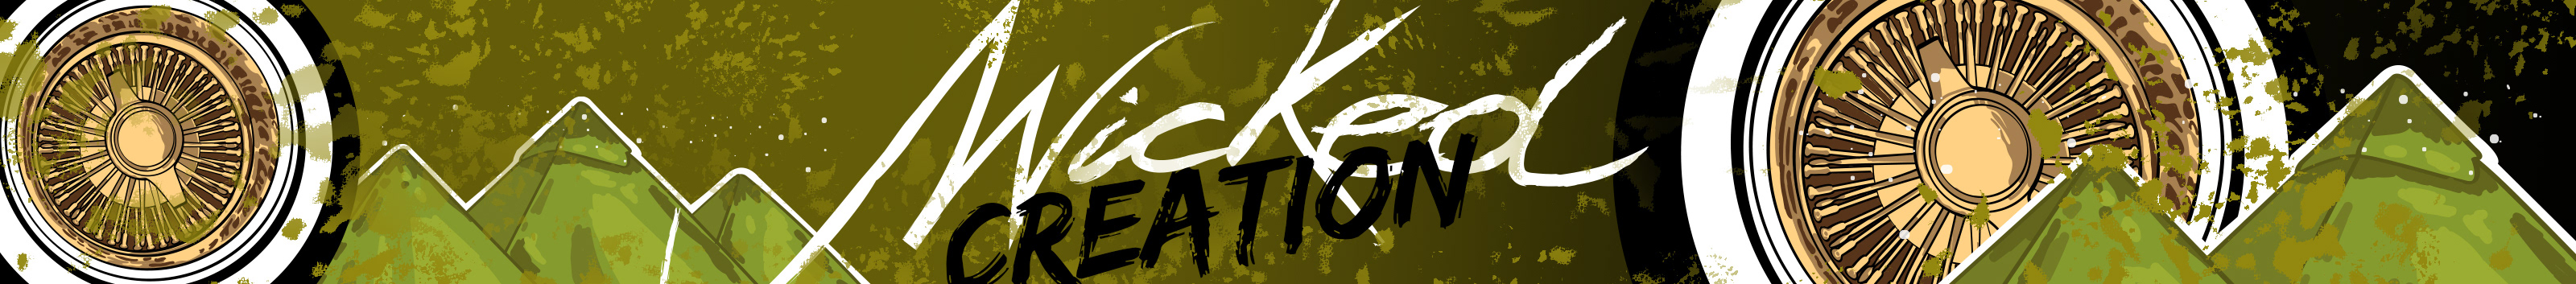 wicked. creation's profile banner